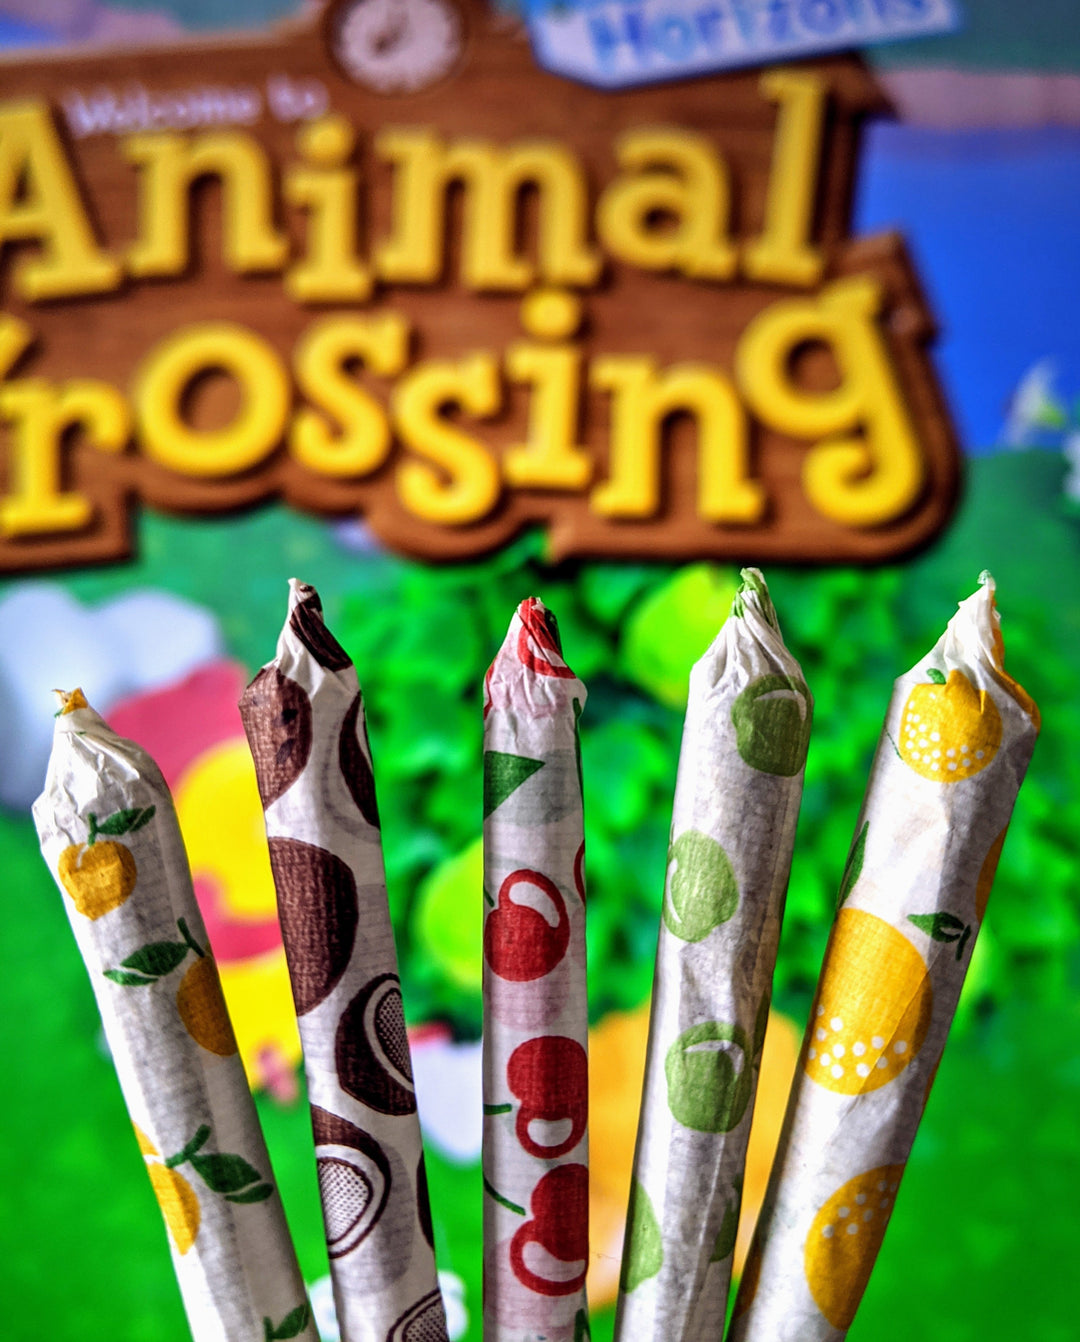 Smoking joints while playing Animal crossing